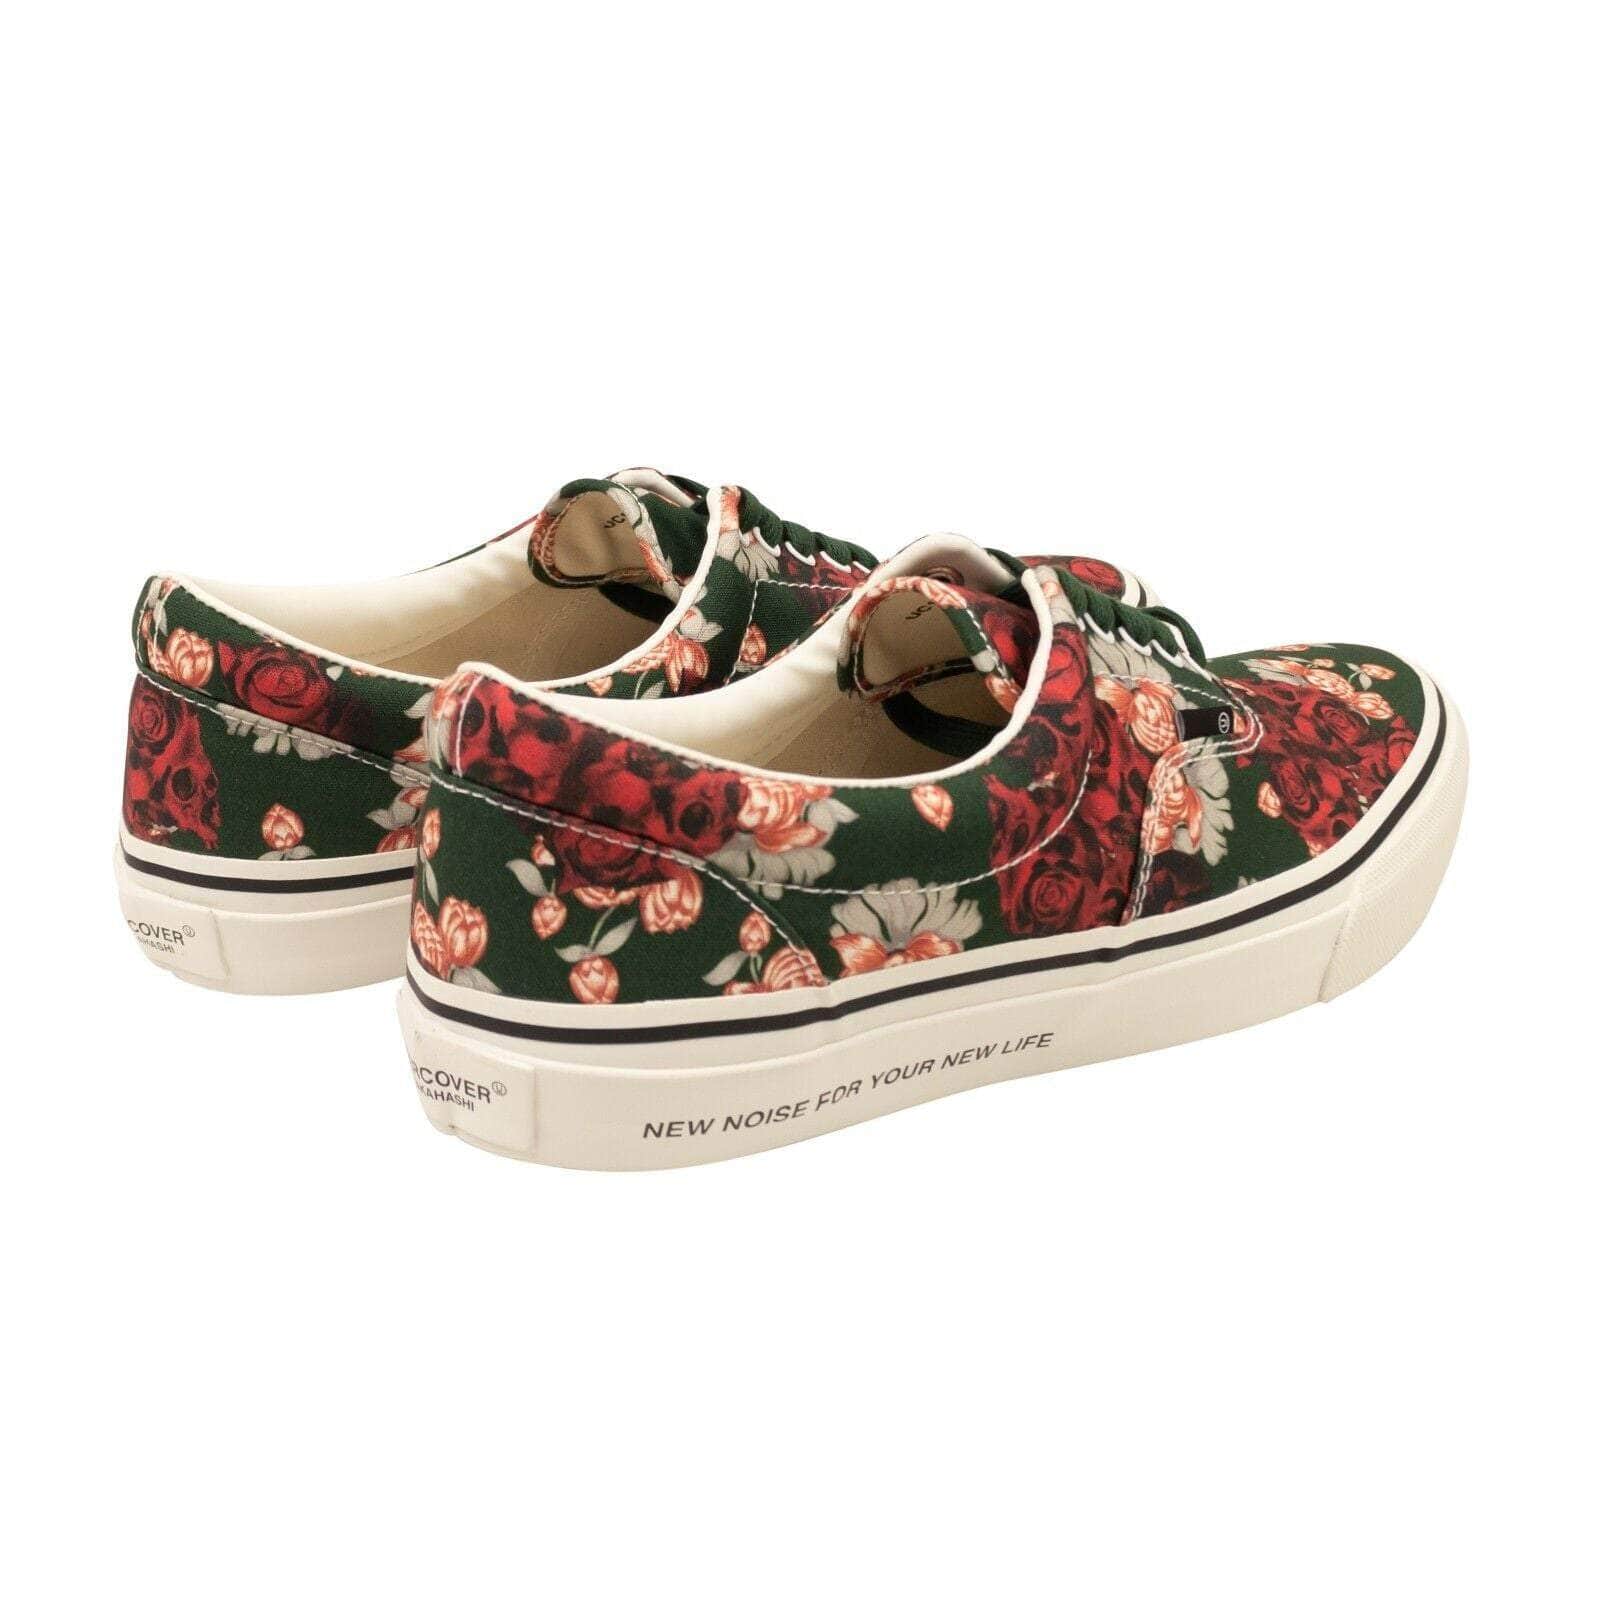 UNDERCOVER 250-500, channelenable-all, chicmi, couponcollection, gender-mens, main-shoes, mens-shoes, size-l, size-m, size-xl, undercover Green Floral Print Canvas Sneakers